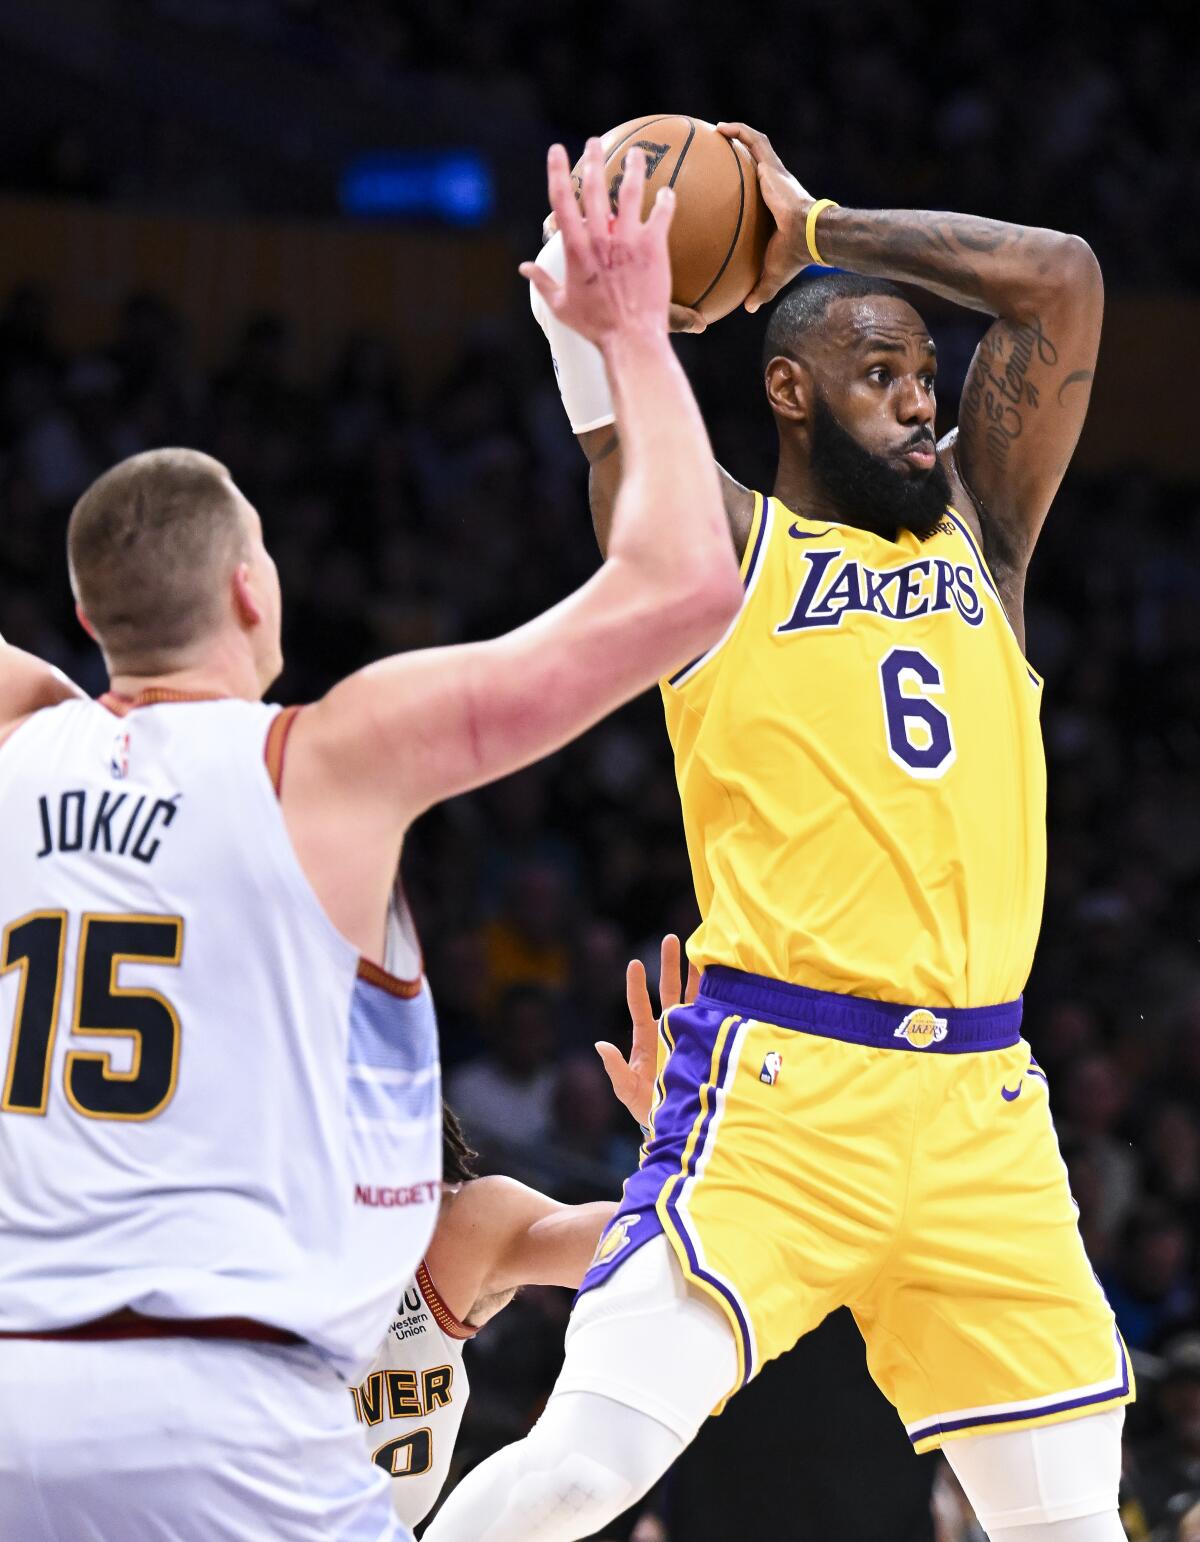 Lakers forward LeBron James, right, leaps to make a pass while defended by Nuggets center Nikola Jokic.